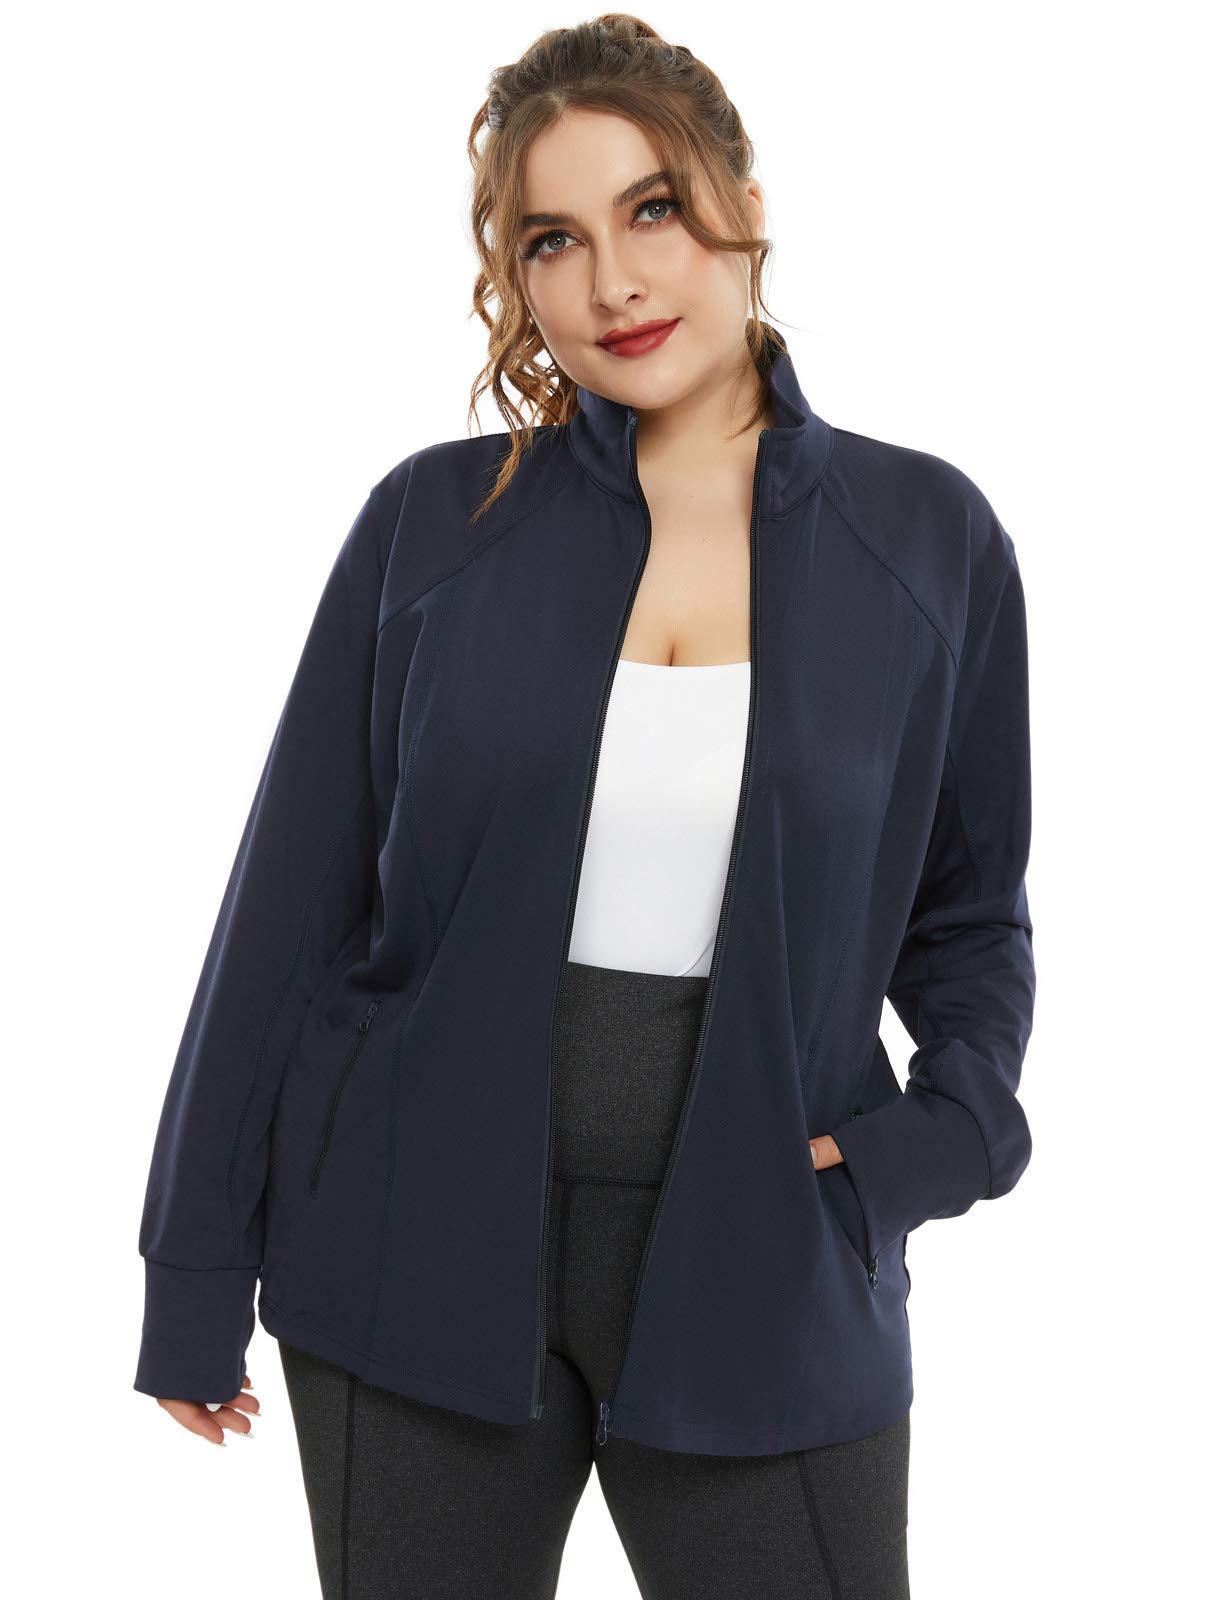 Hanna Nikole Womens Plus Size Active Full Zip Long Sleeve Jacket with Front Pockets Navy 24W